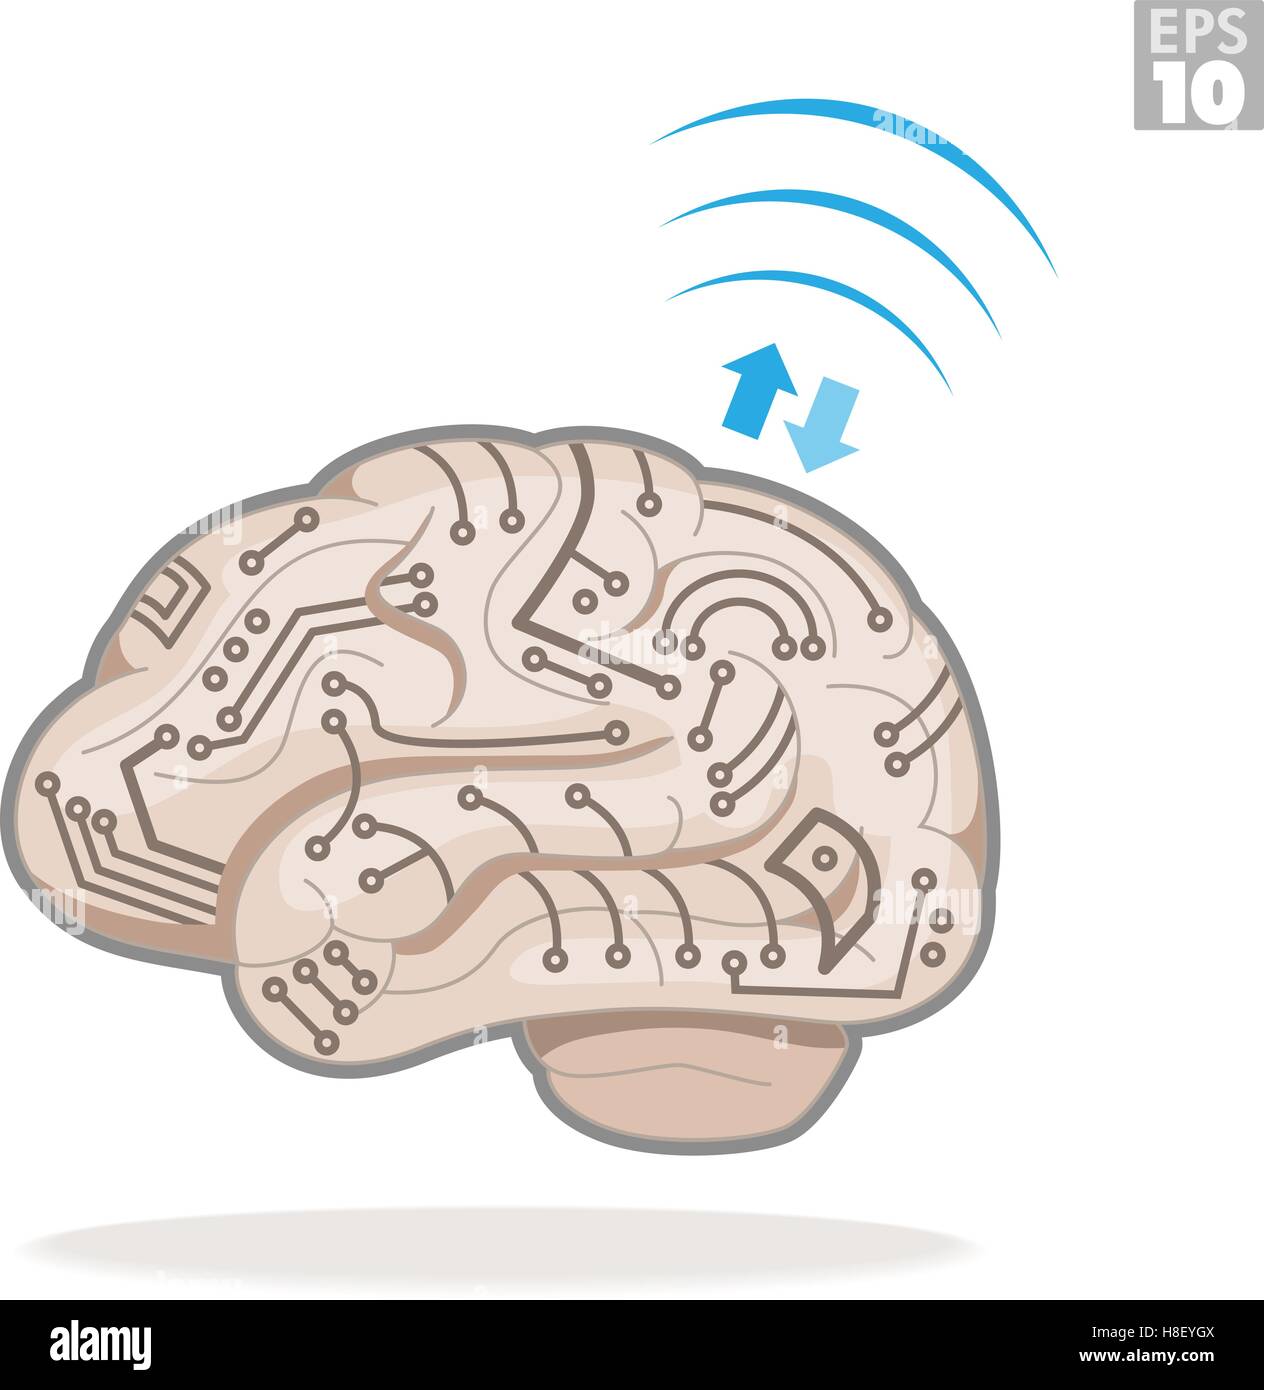 Human brain with electronic circuits, processing information and transferring data wirelessly. Stock Vector